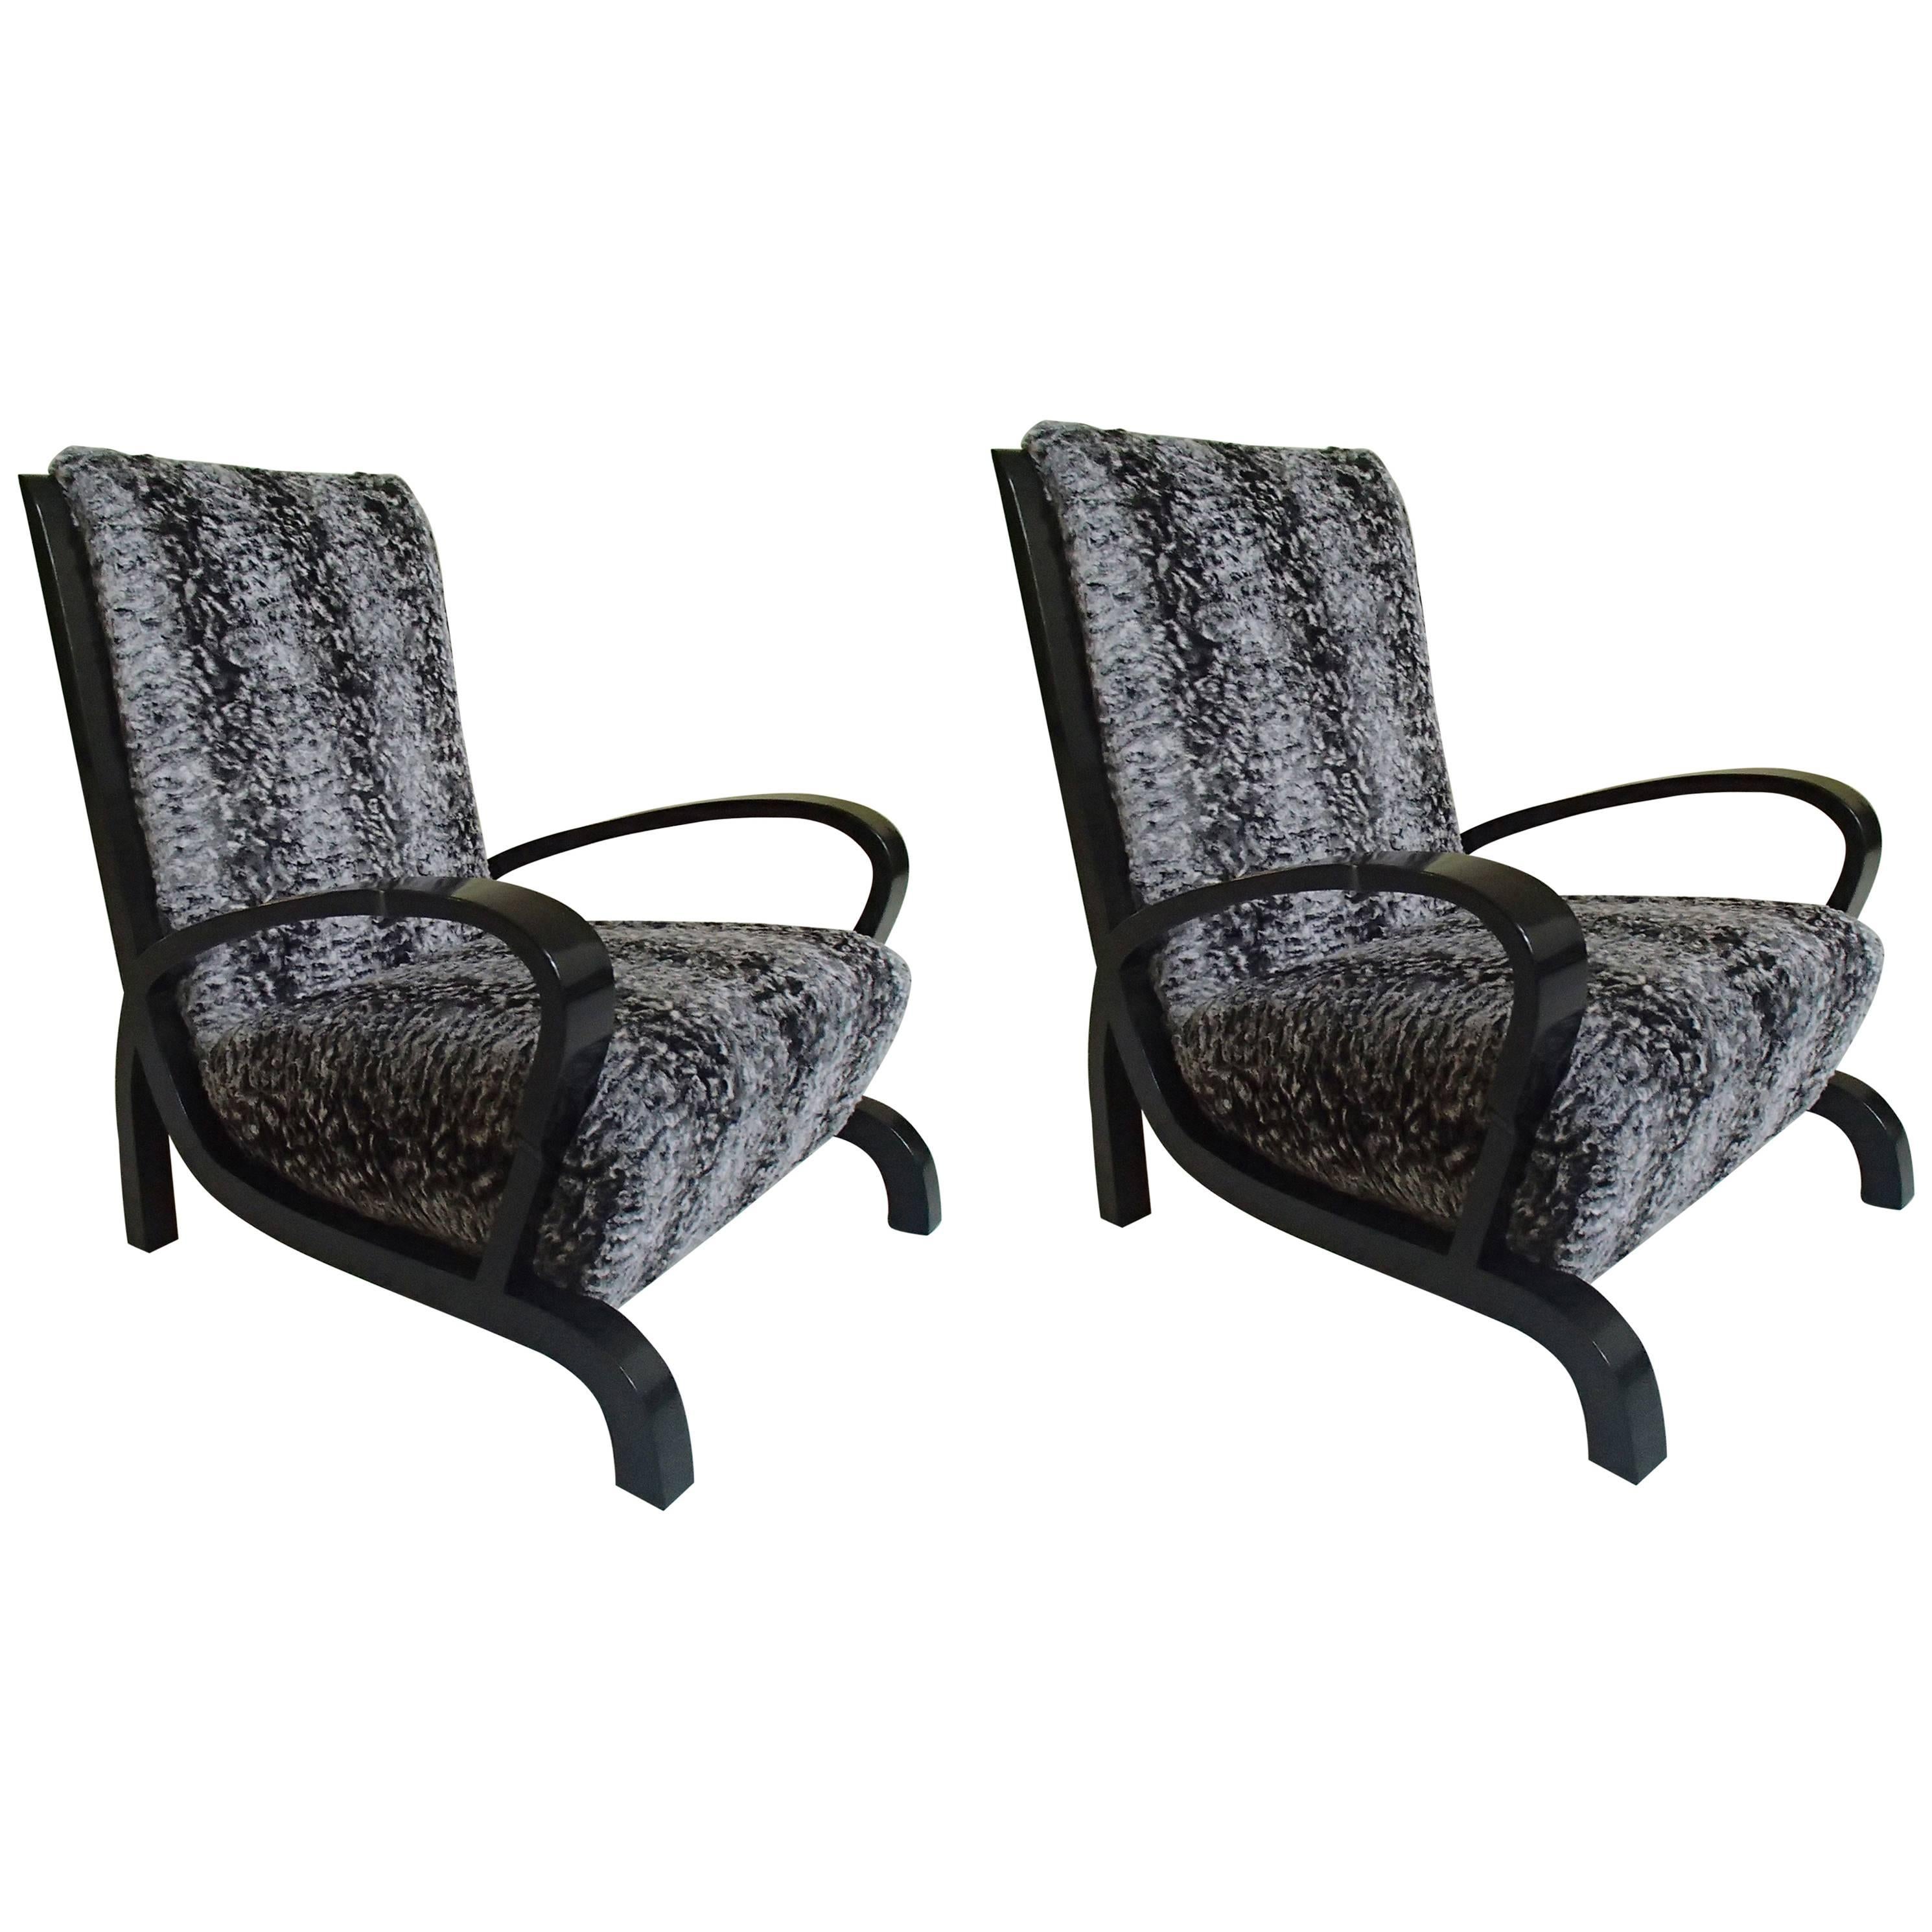 Bauhaus Pair of Armchairs Black Wood and Faux Fur Astrakhan New Recovered Seat